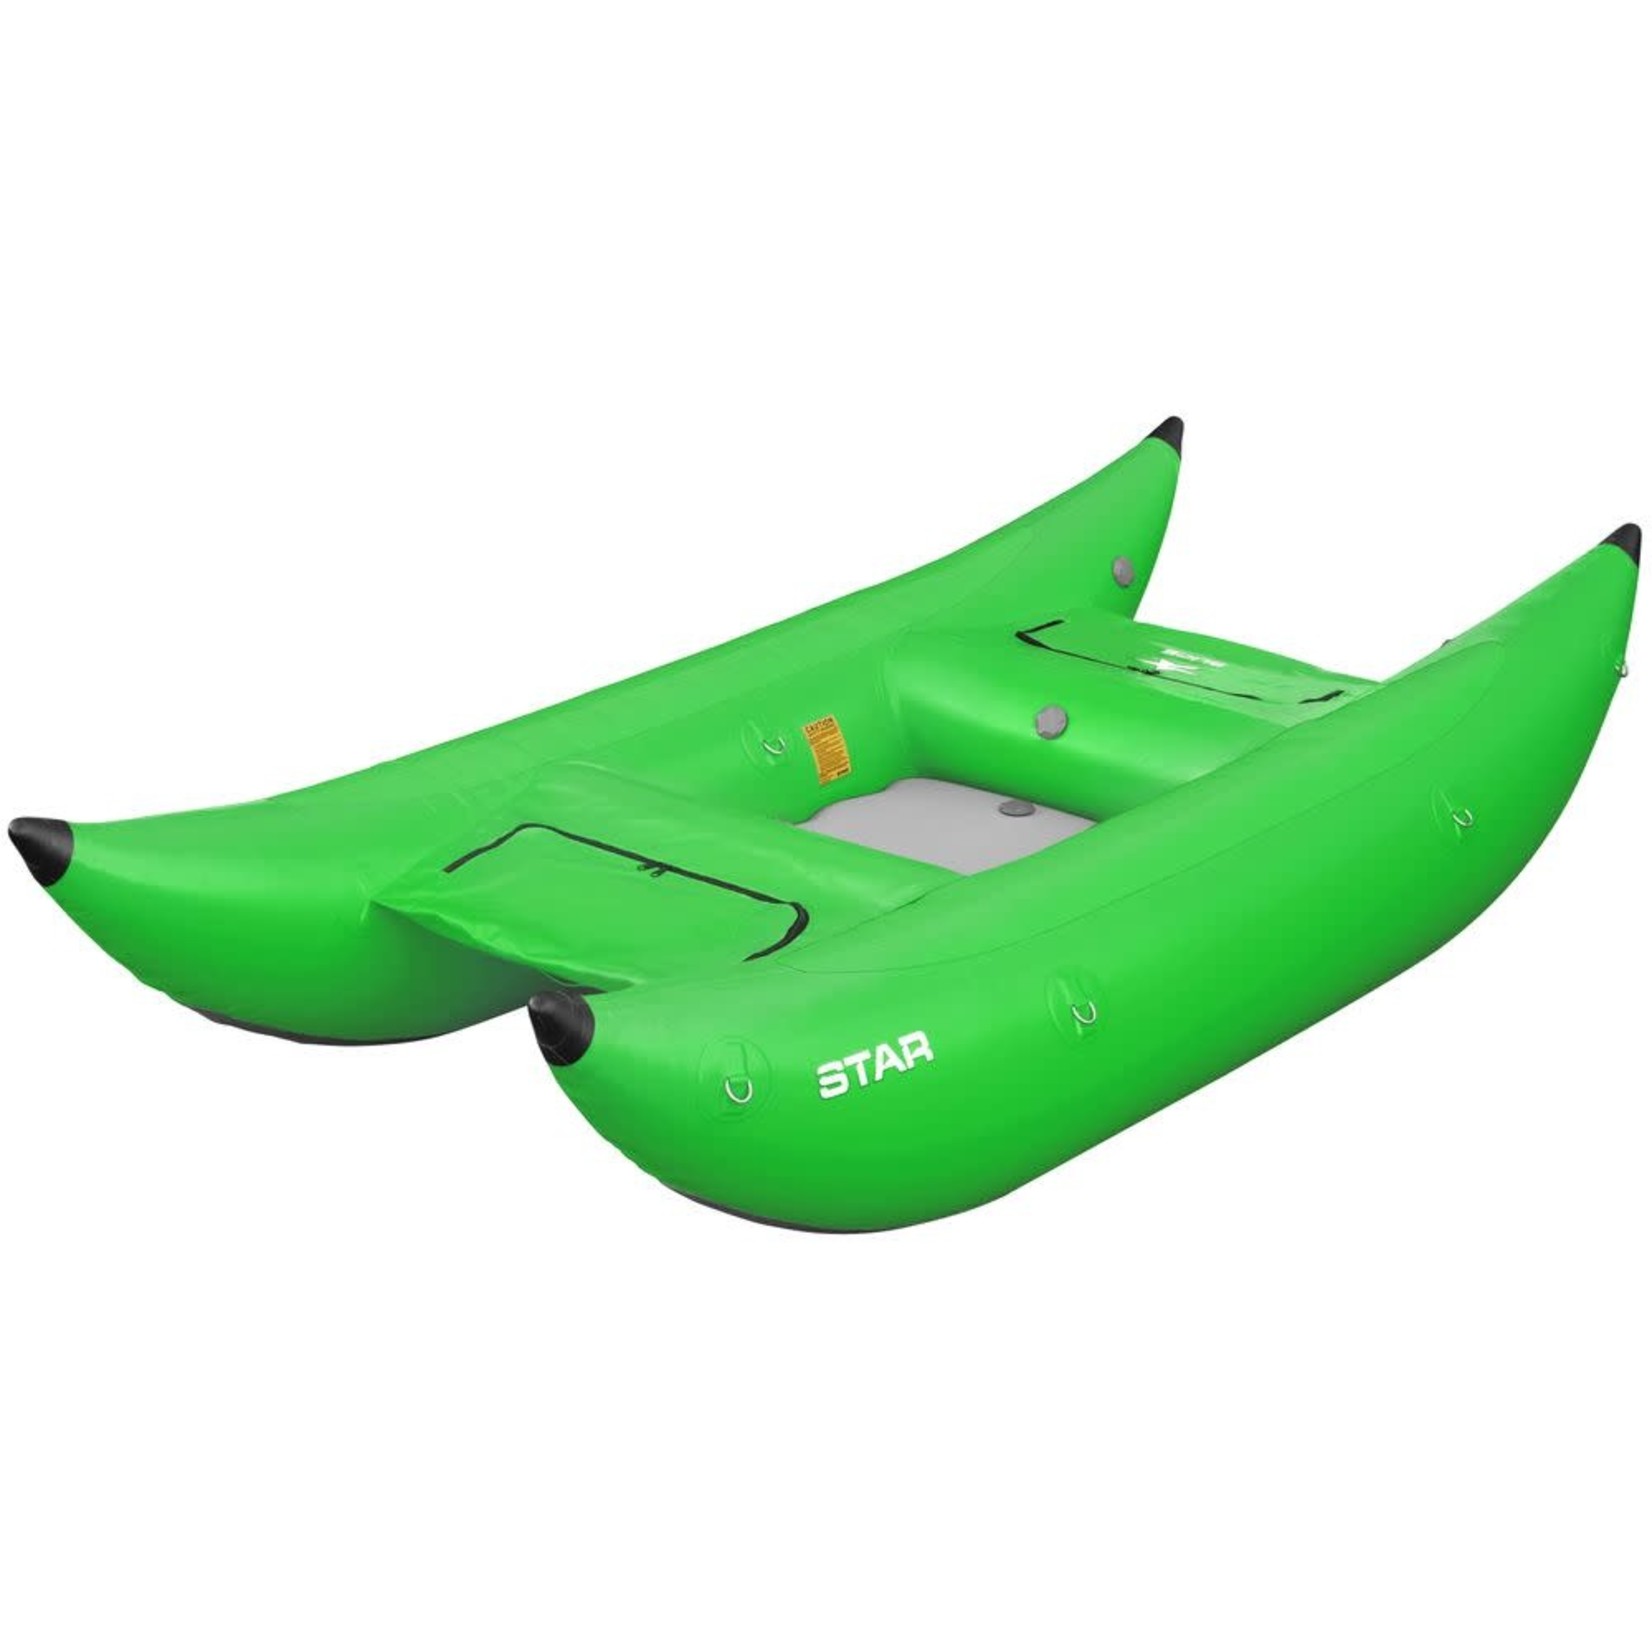 STAR Inflatables STAR Slice Paddle Catarafts